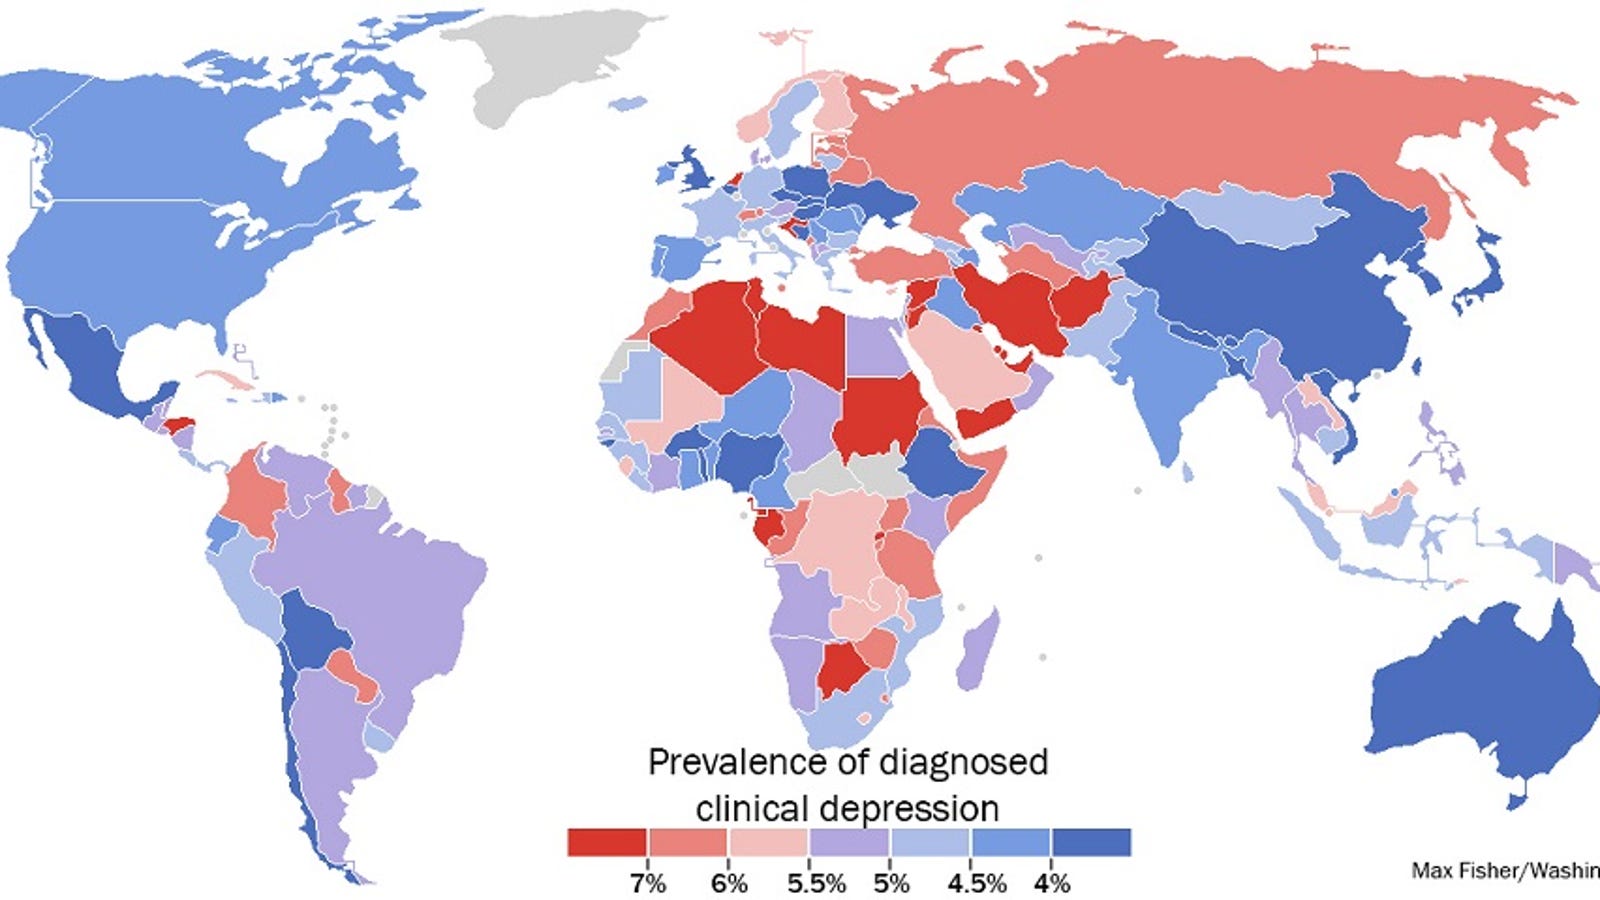 Which countries have the highest rate of diagnosed depression?